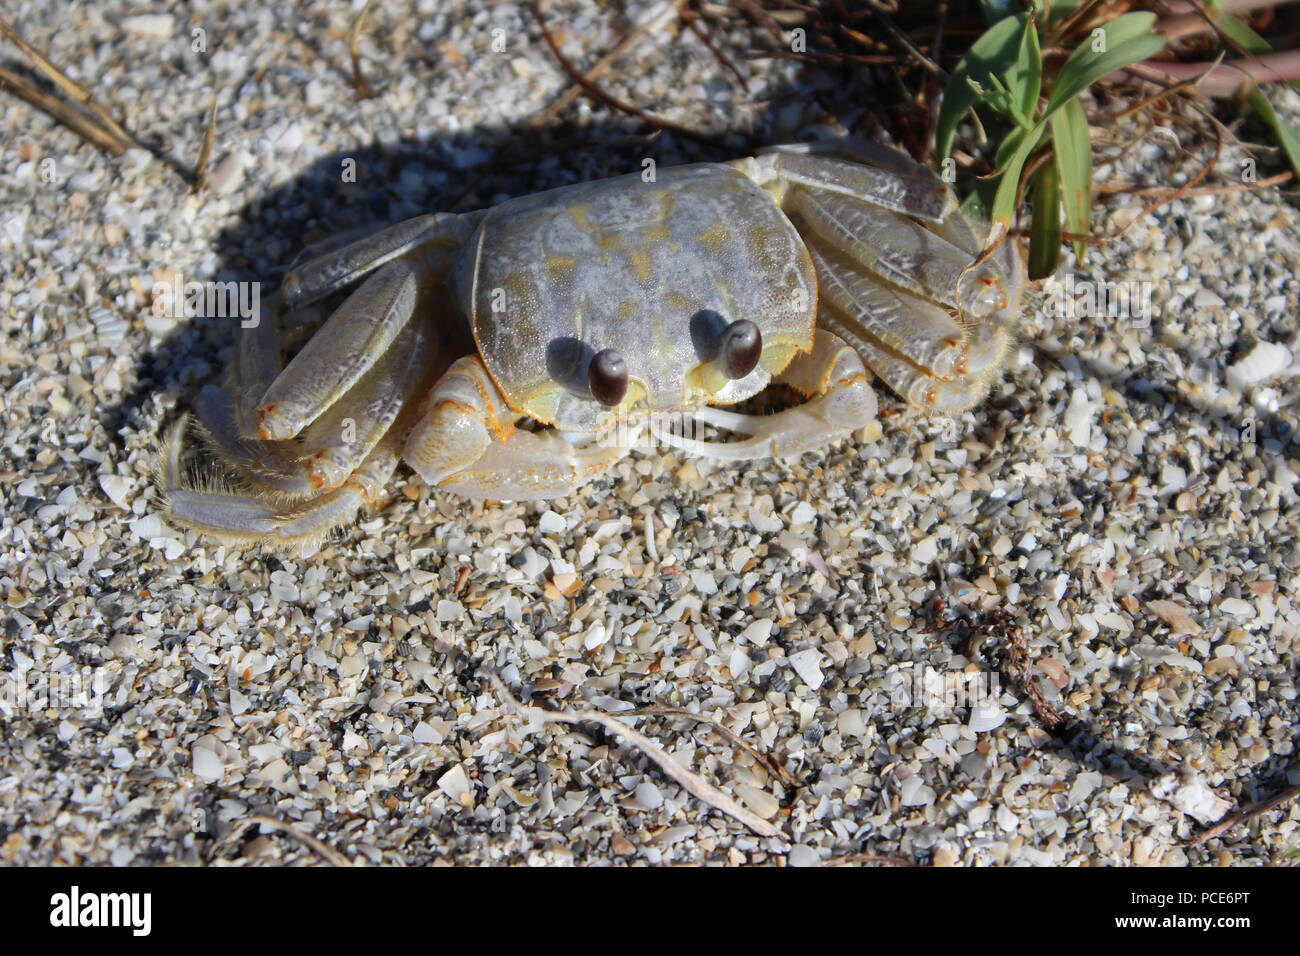 Little crab hiding on the beach at Fort De Soto Park, St. Petersburg, Pinellas County, Florida, US Stock Photo